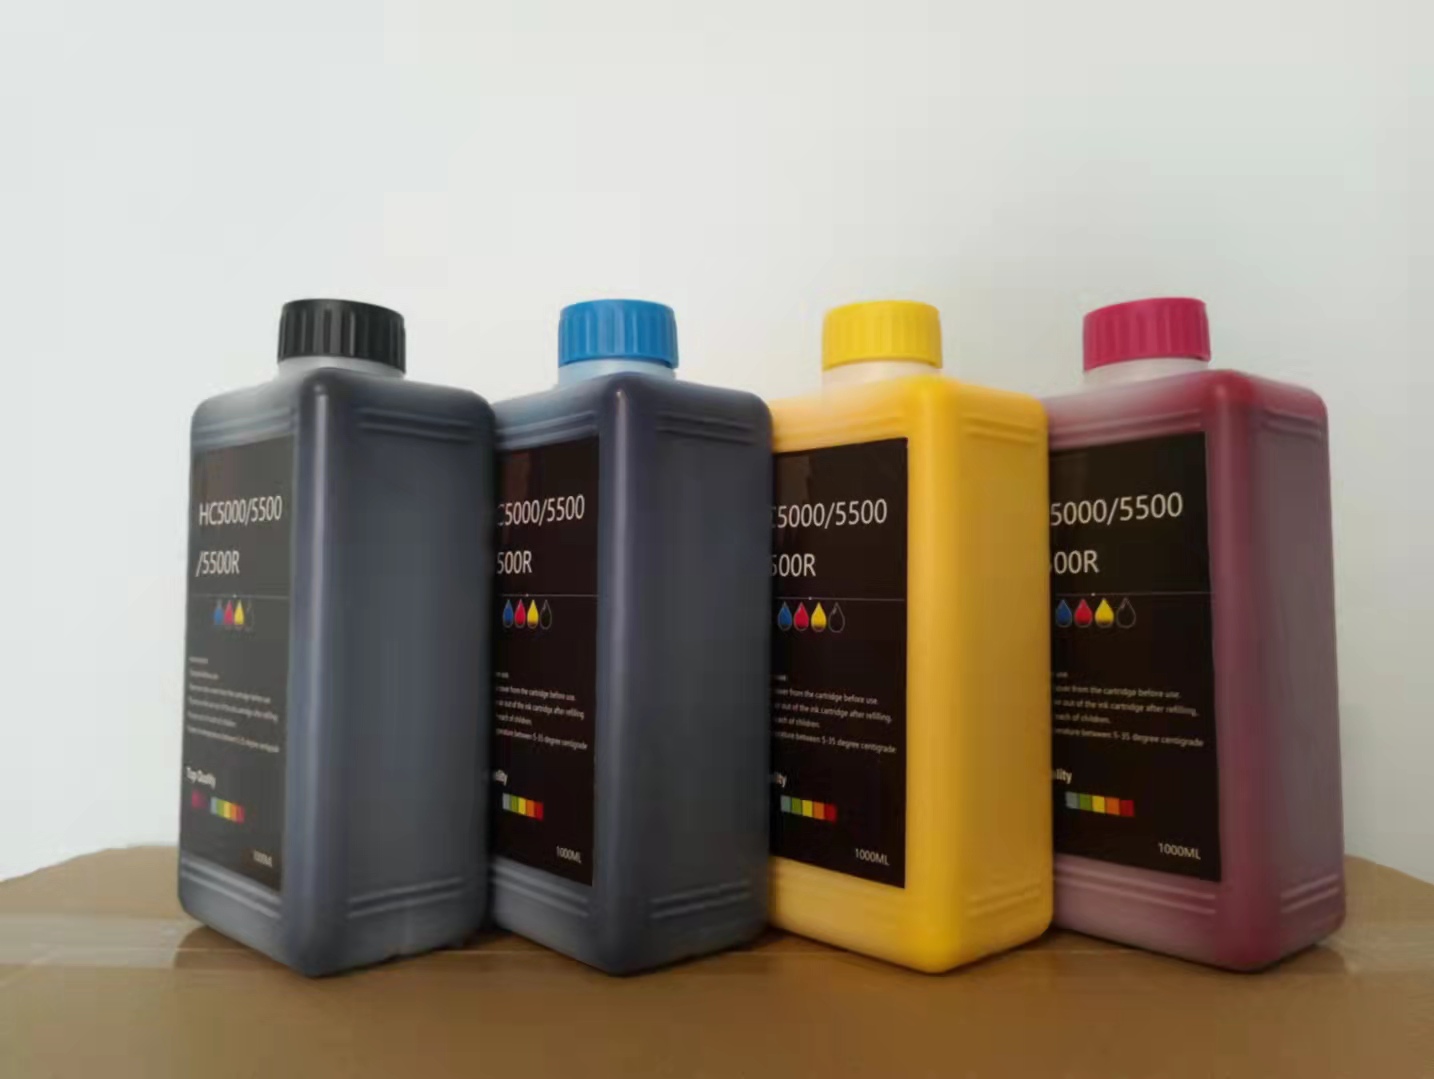 Refill ink for Risograph, HC5500/HC5000/HC5000R, Comcolor Series, USD43/Bottle